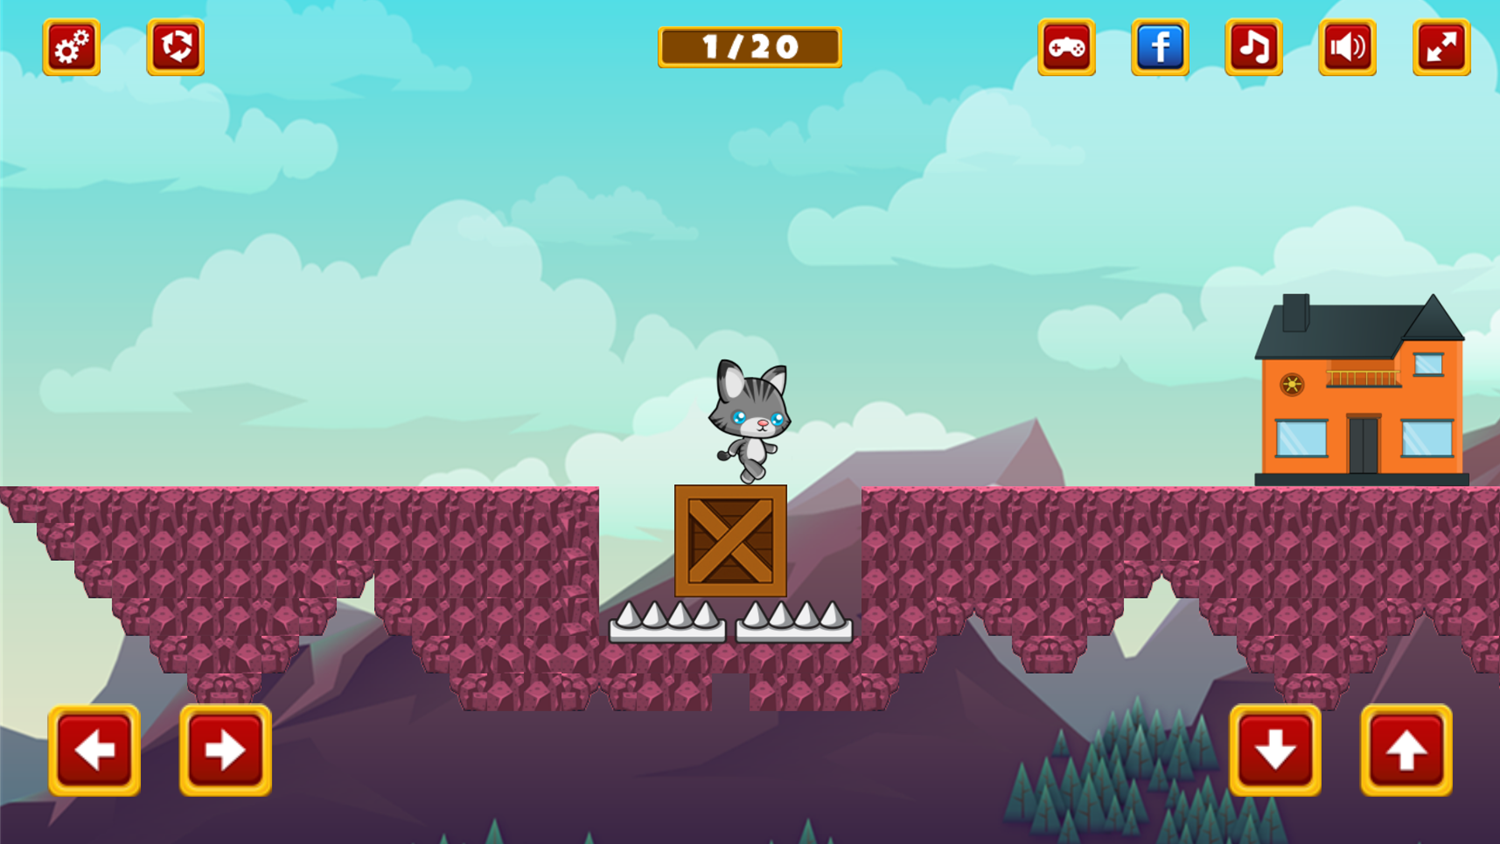 Lost Kitty Go Home Game Play Screenshot.